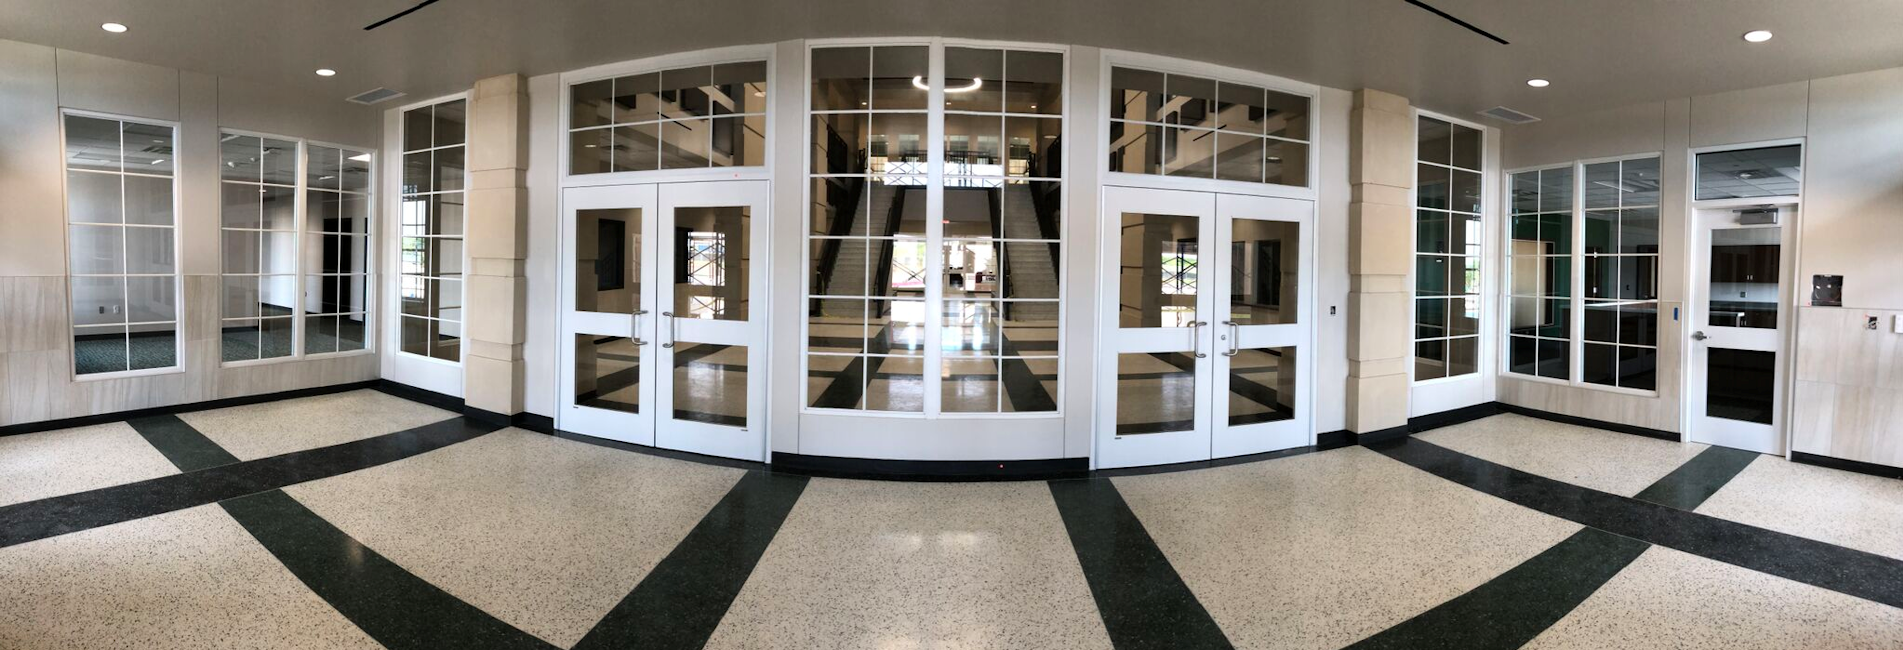 Custom Glass Installer Grapevine Texas Dallas Fort Worth Glass & Mirror Installation | Residential Glass | Commercial Glass & Glazing | AB Glass &